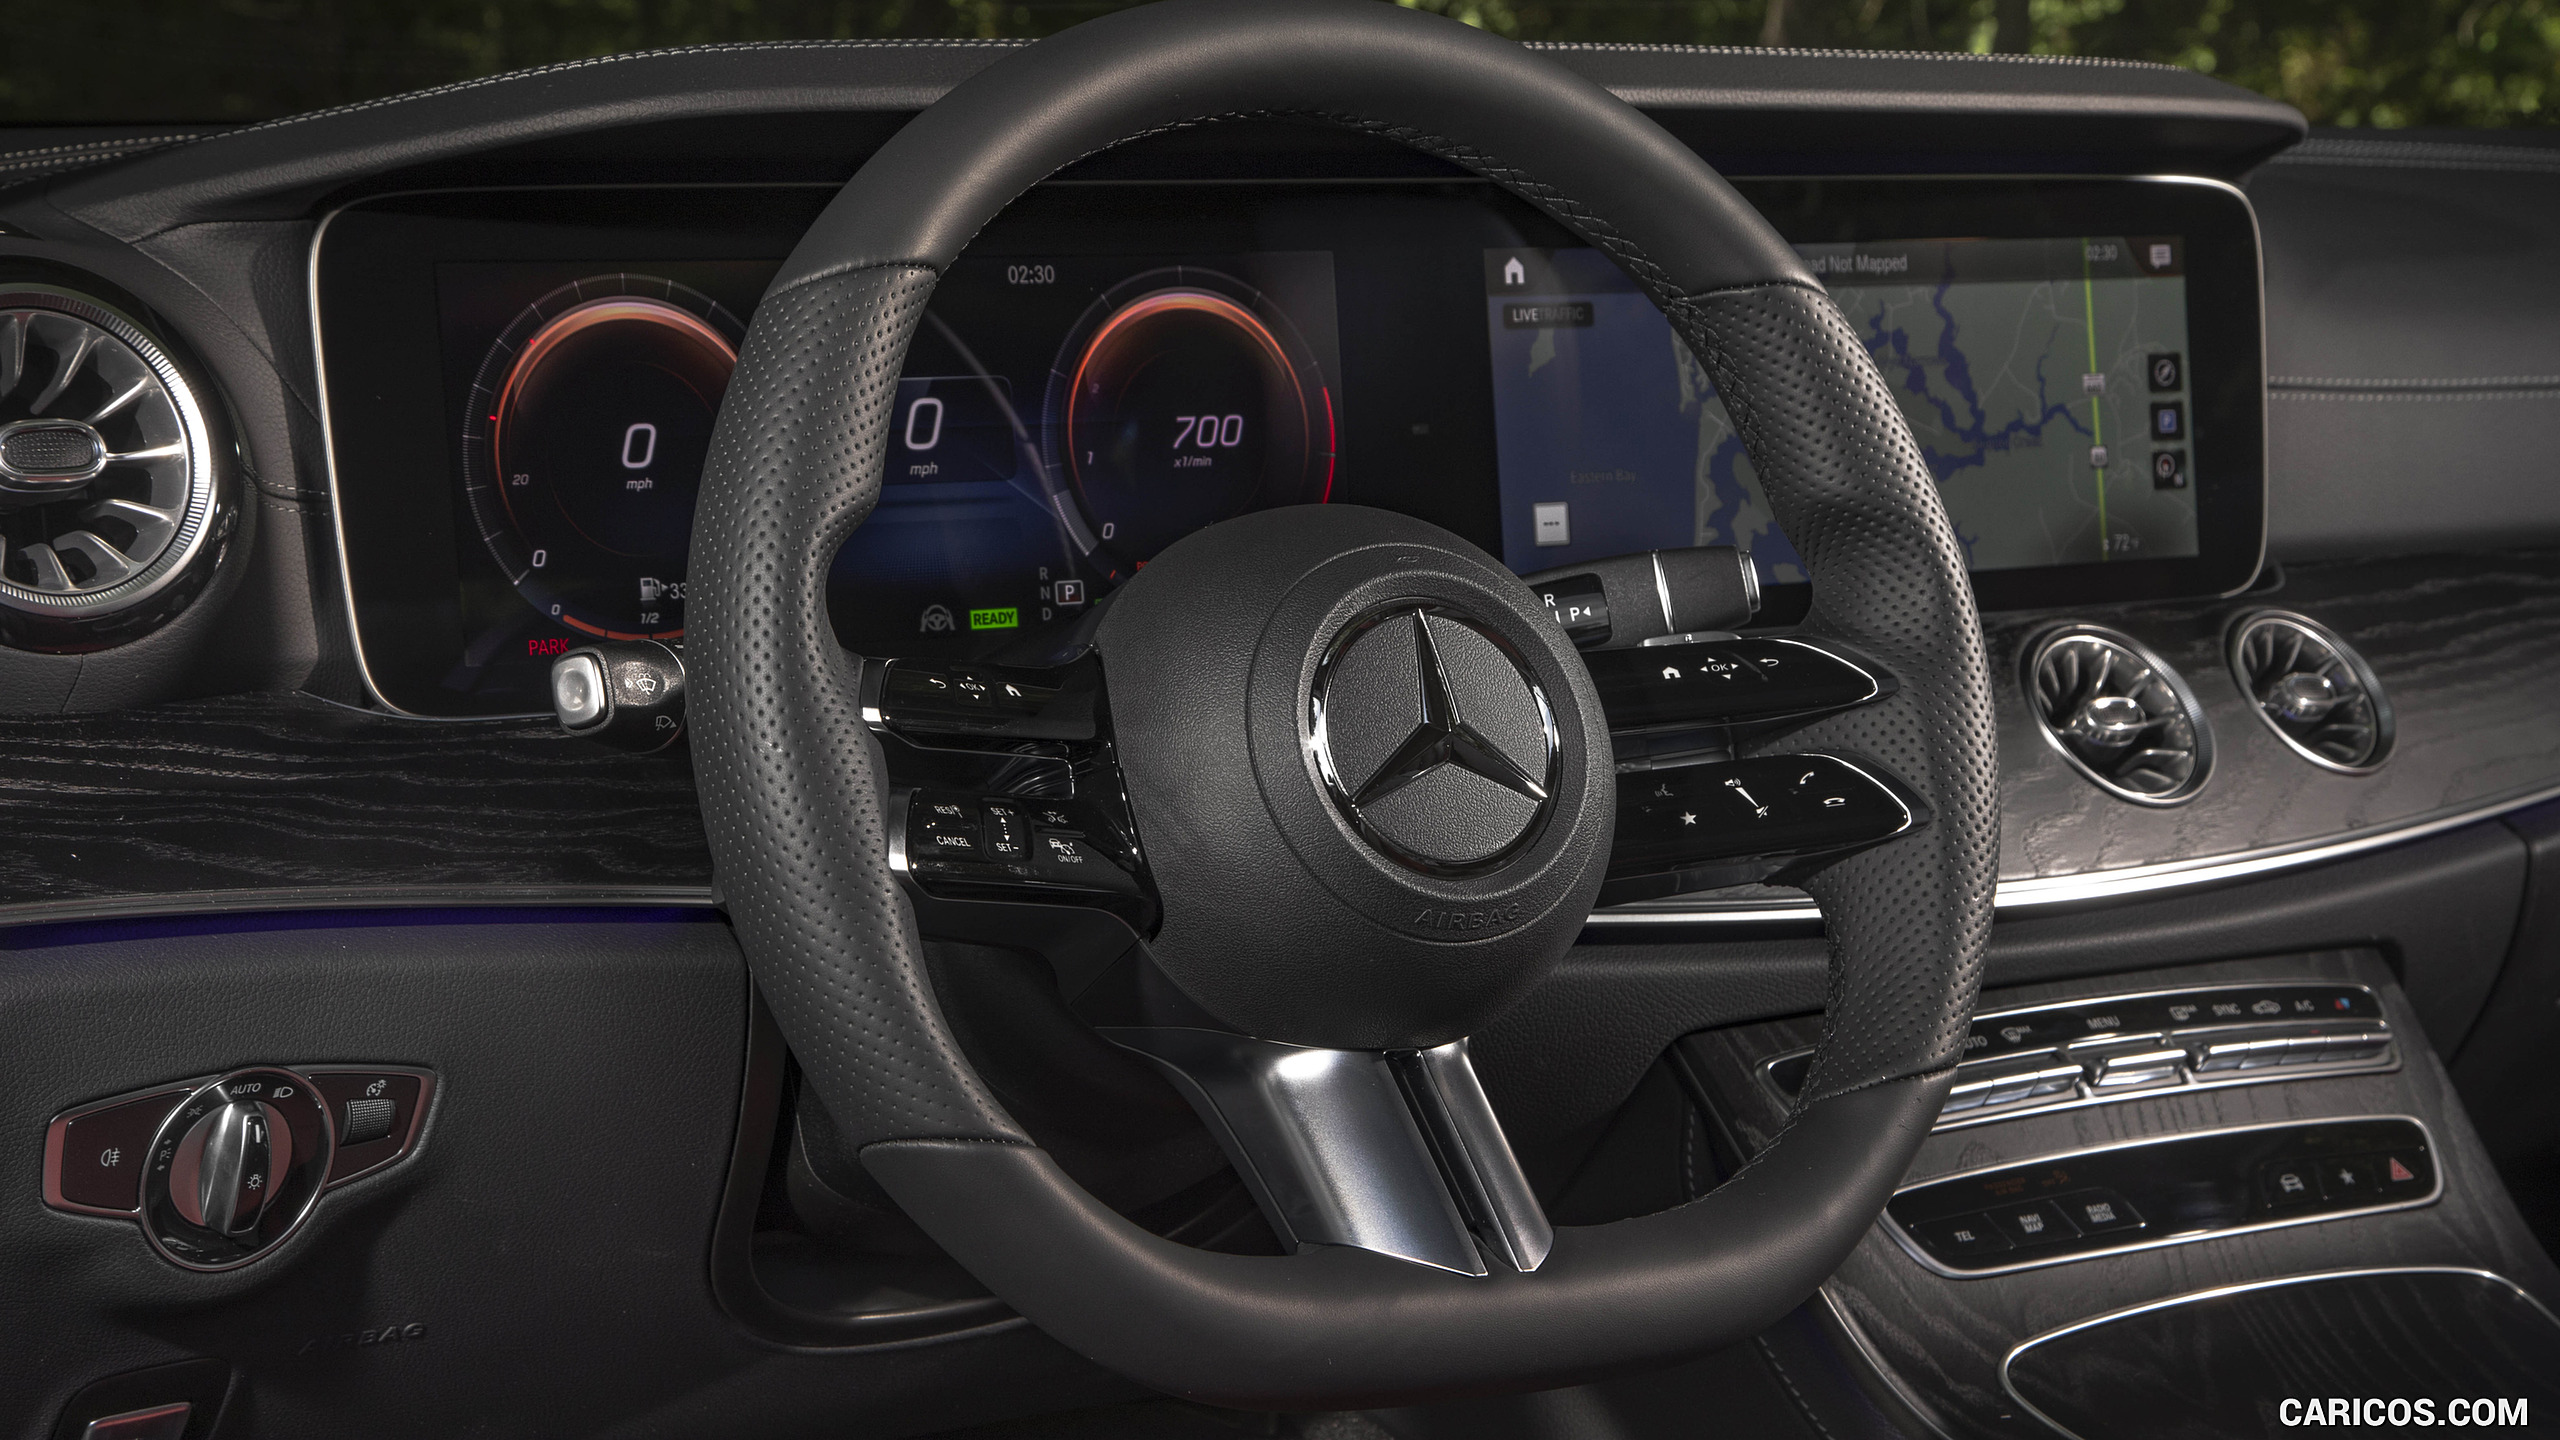 2021 Mercedes-Benz E 450 4MATIC Coupe (US-Spec) - Interior, Steering Wheel, #36 of 49